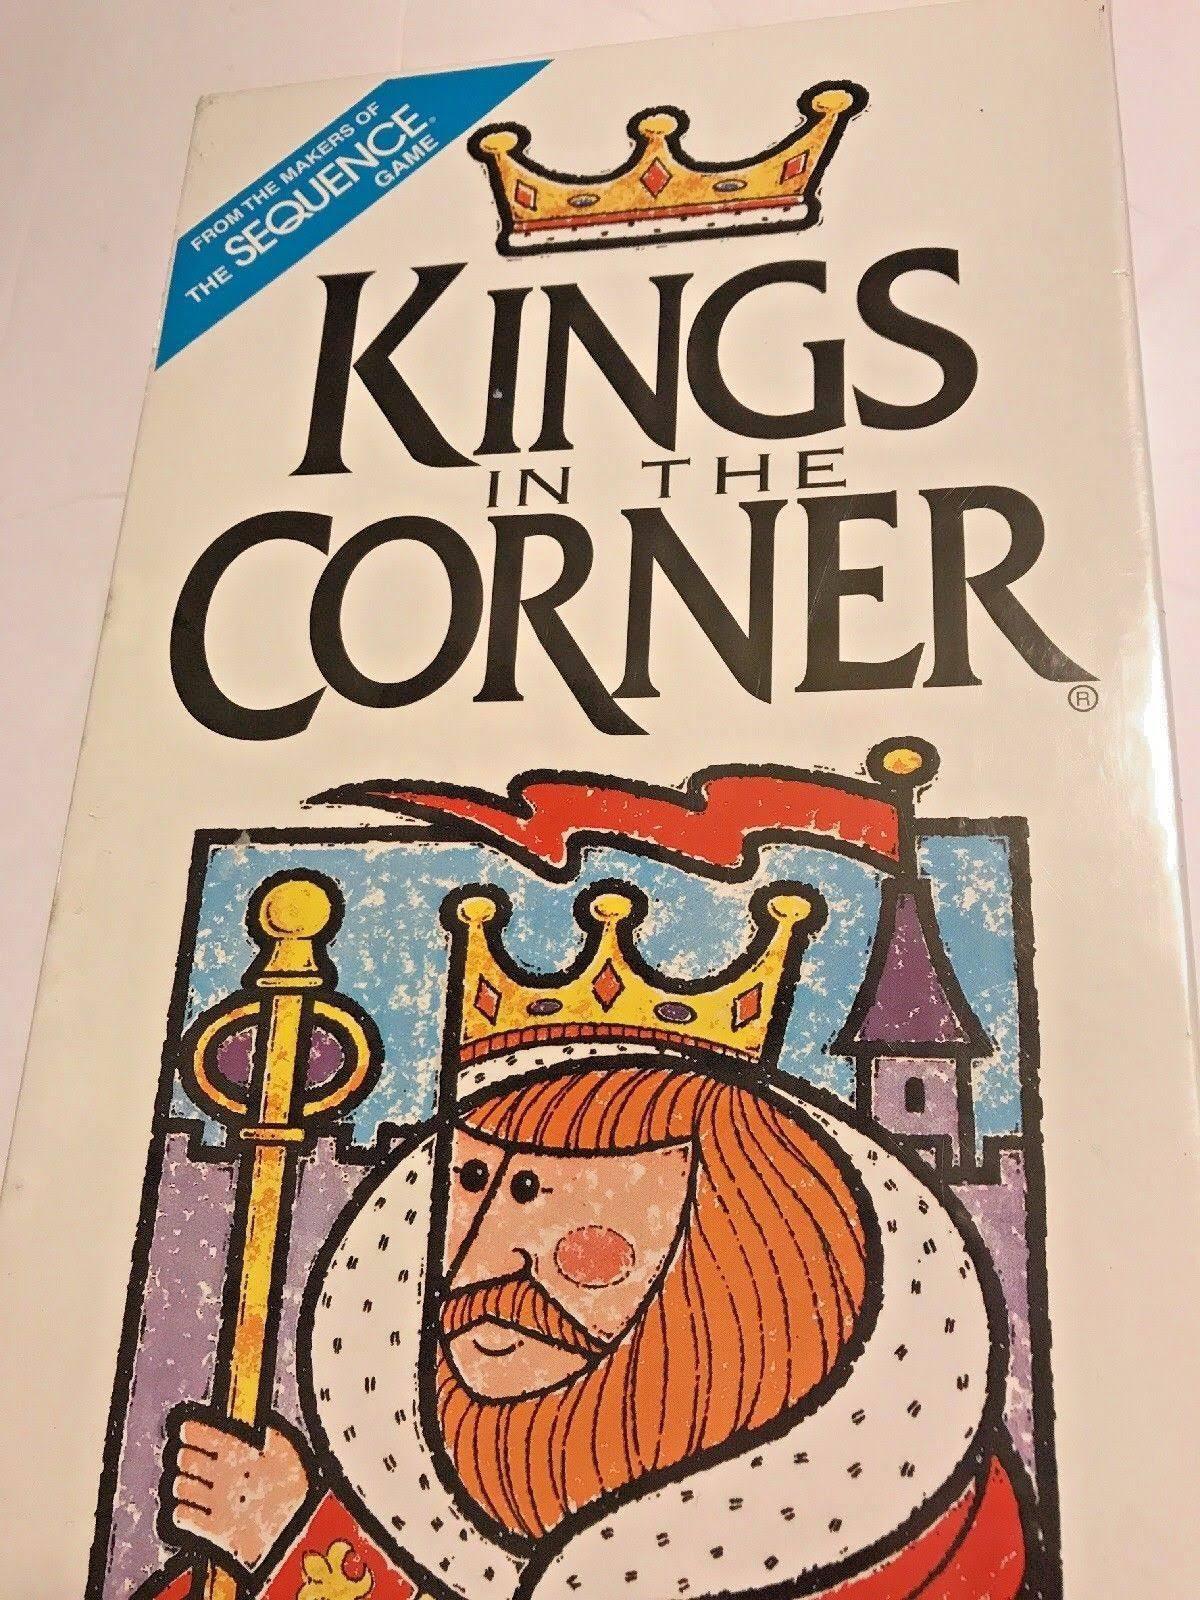 Kings in the Corner Kids Playing Cards - Classic Solitaire-Style Card Game